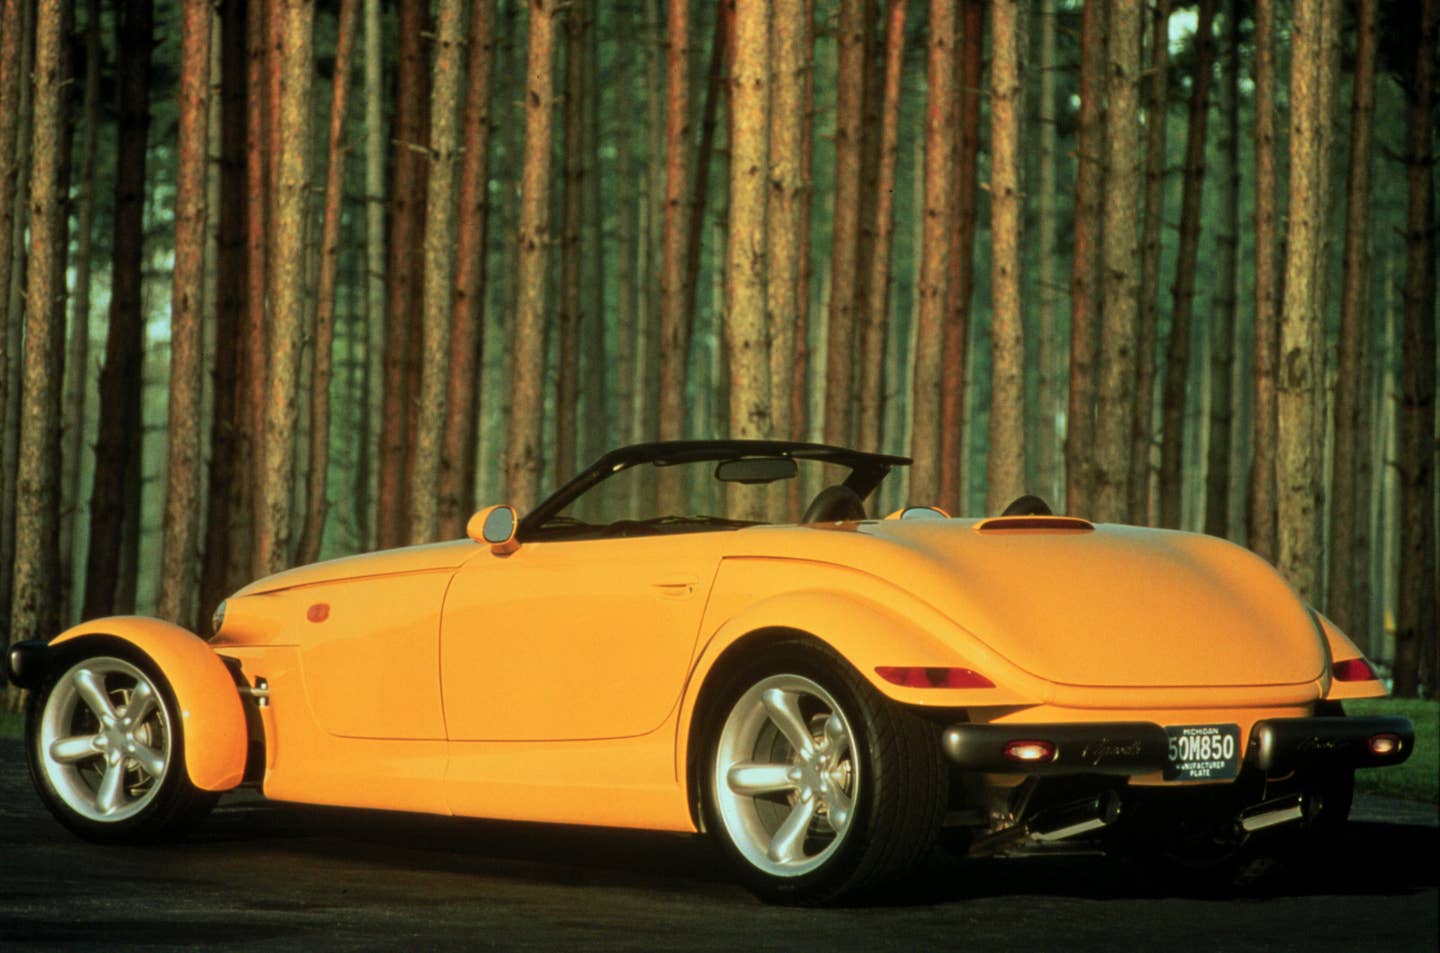 1999 Plymouth Prowler. PP-904.